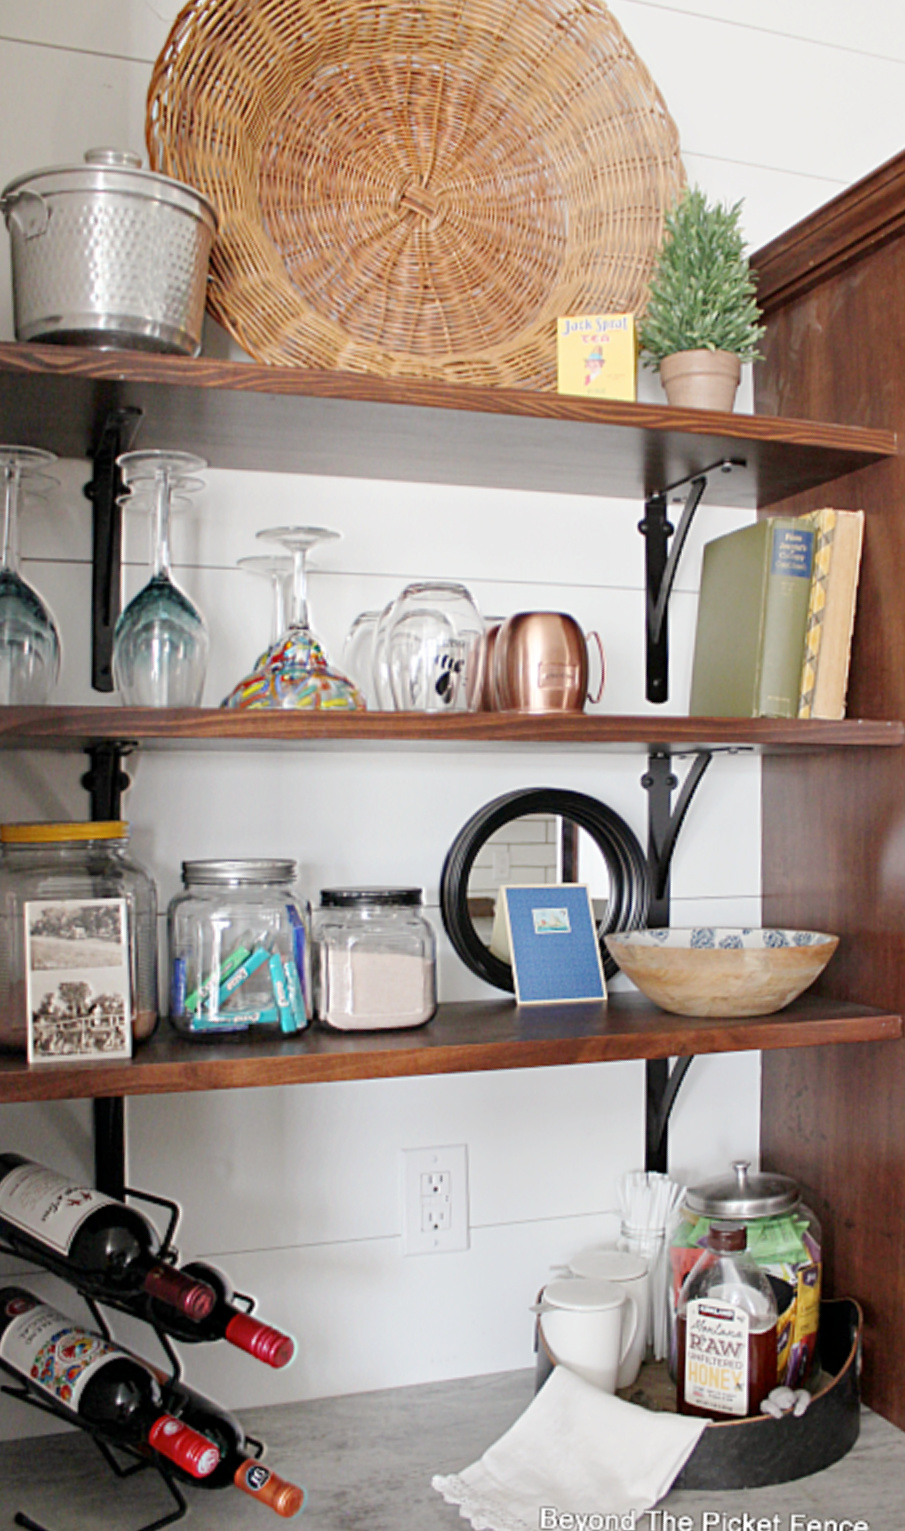 Beyond The Picket Fence: How To Style Shelves and Make a New House Feel ...